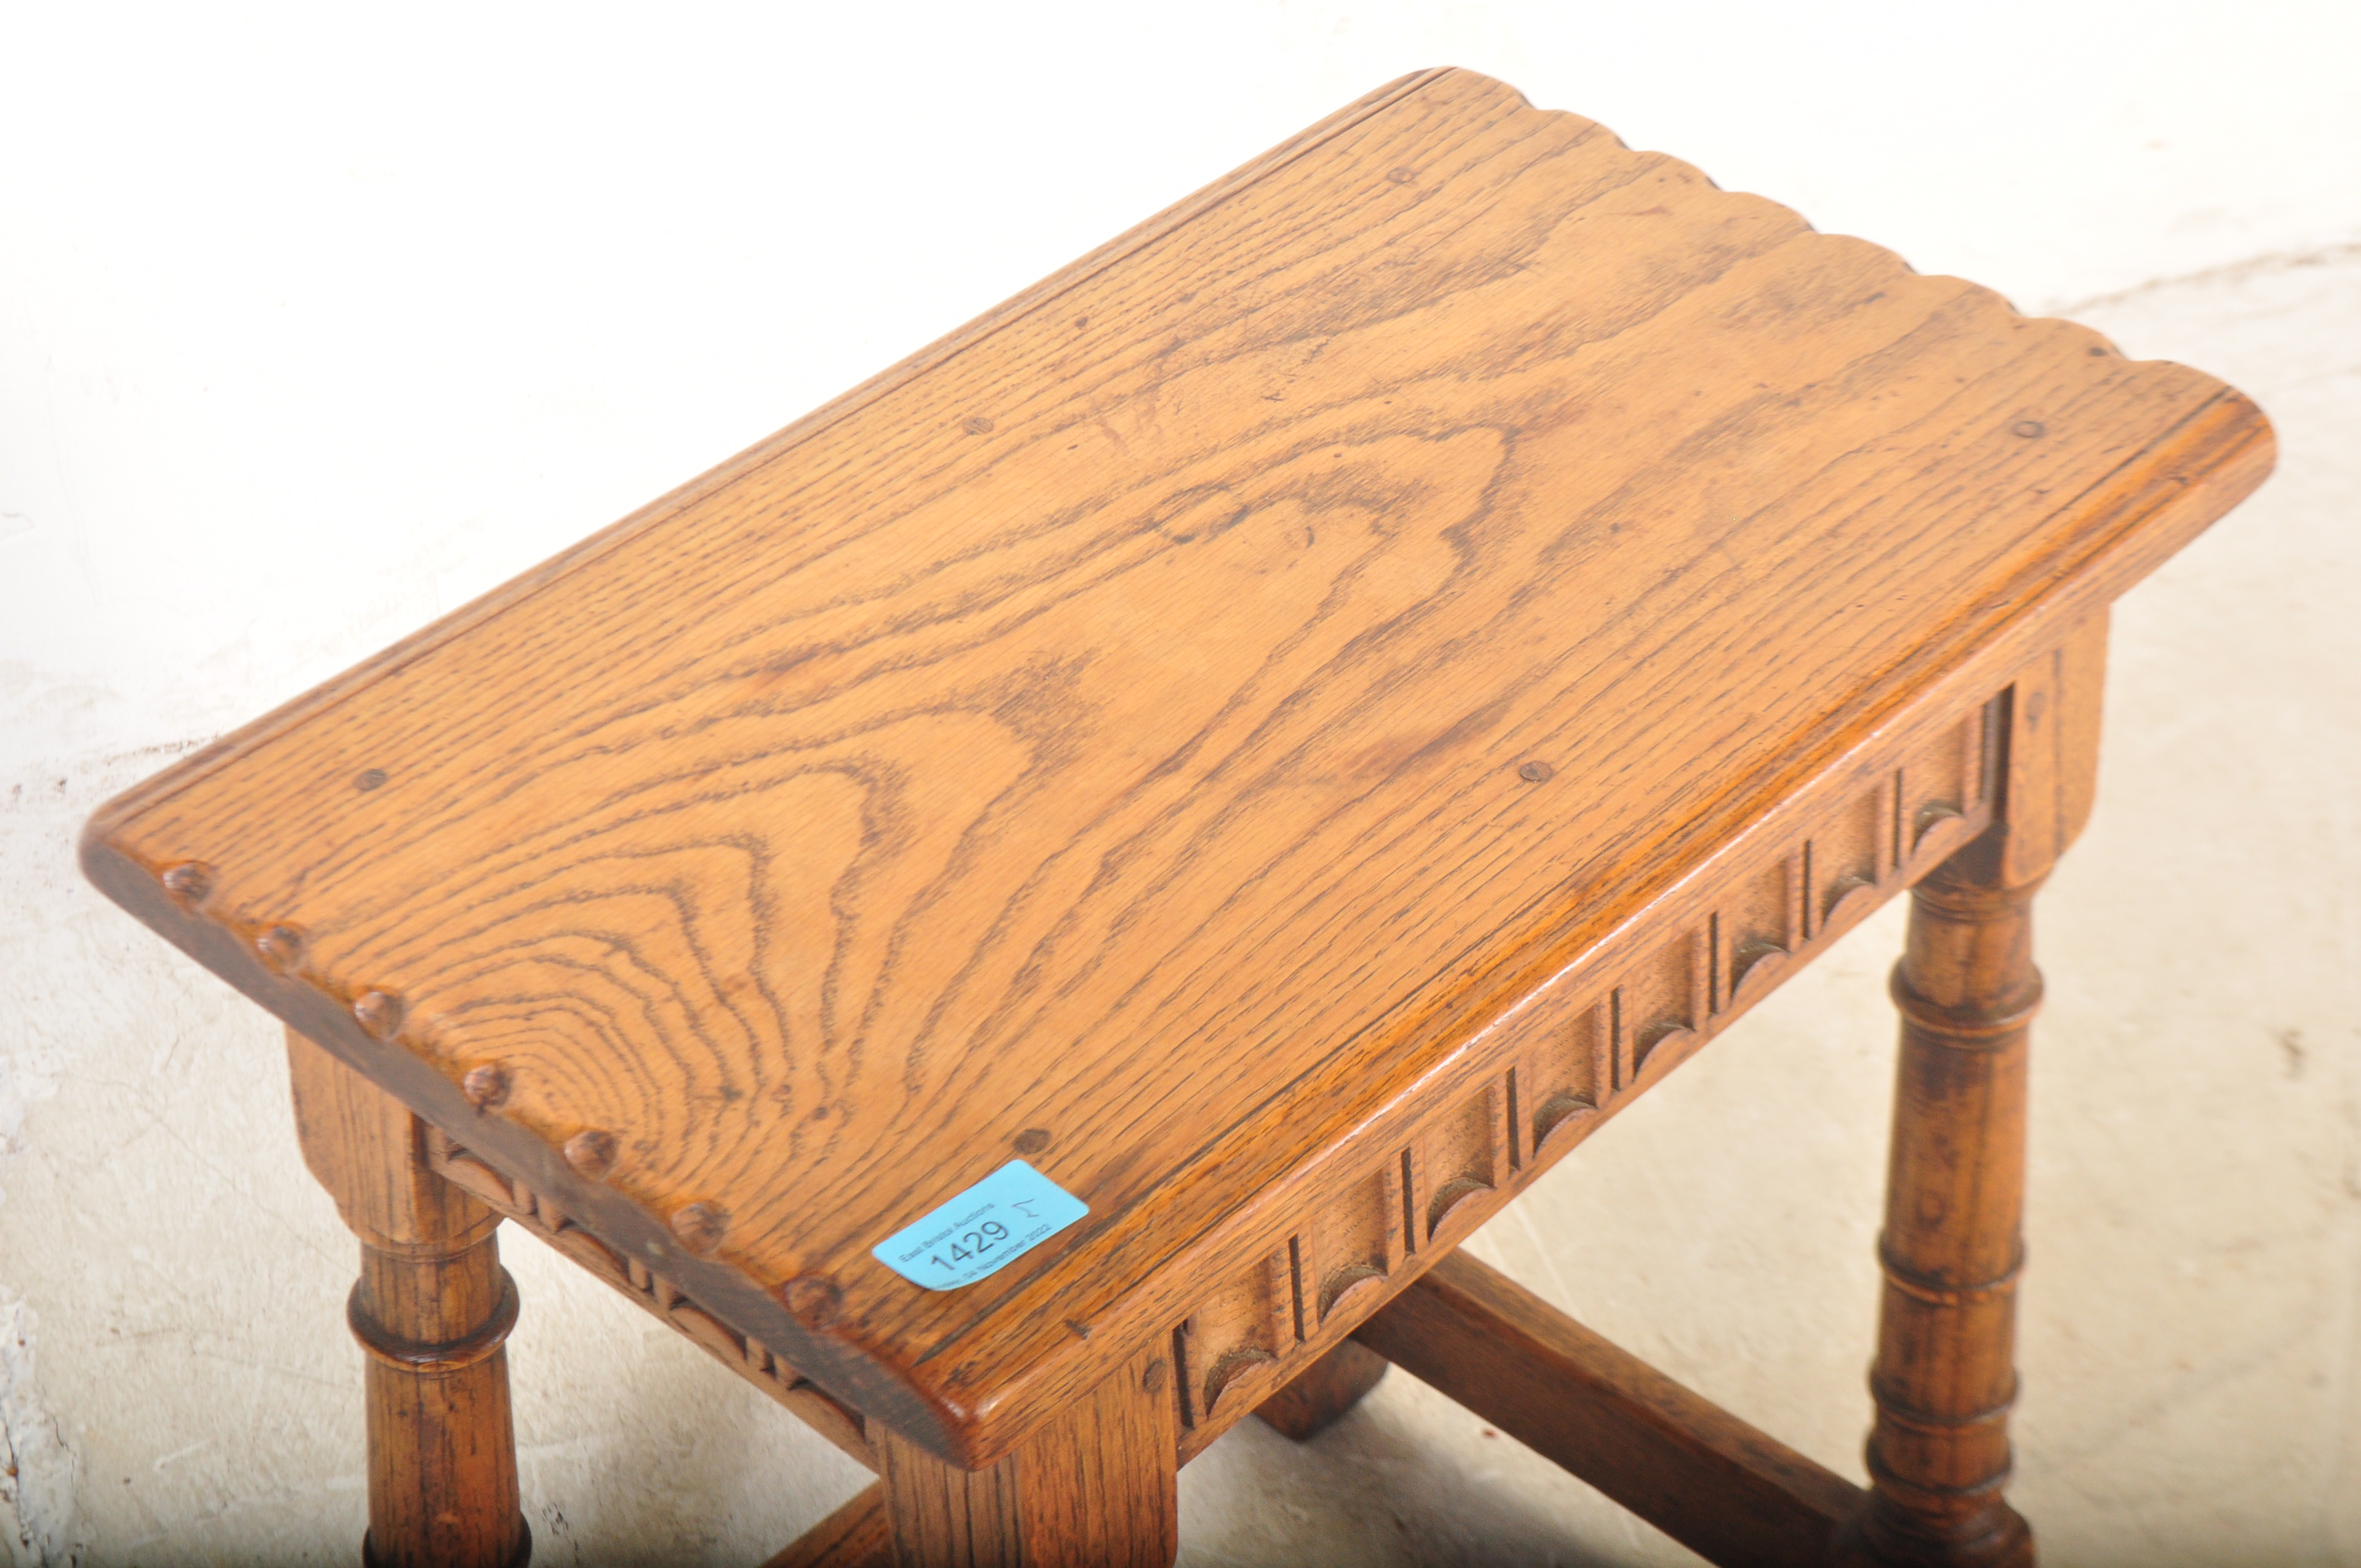 19TH CENTURY PEG JOINTED ARTS & CRAFTS OAK JOINT STOOL - Image 3 of 4